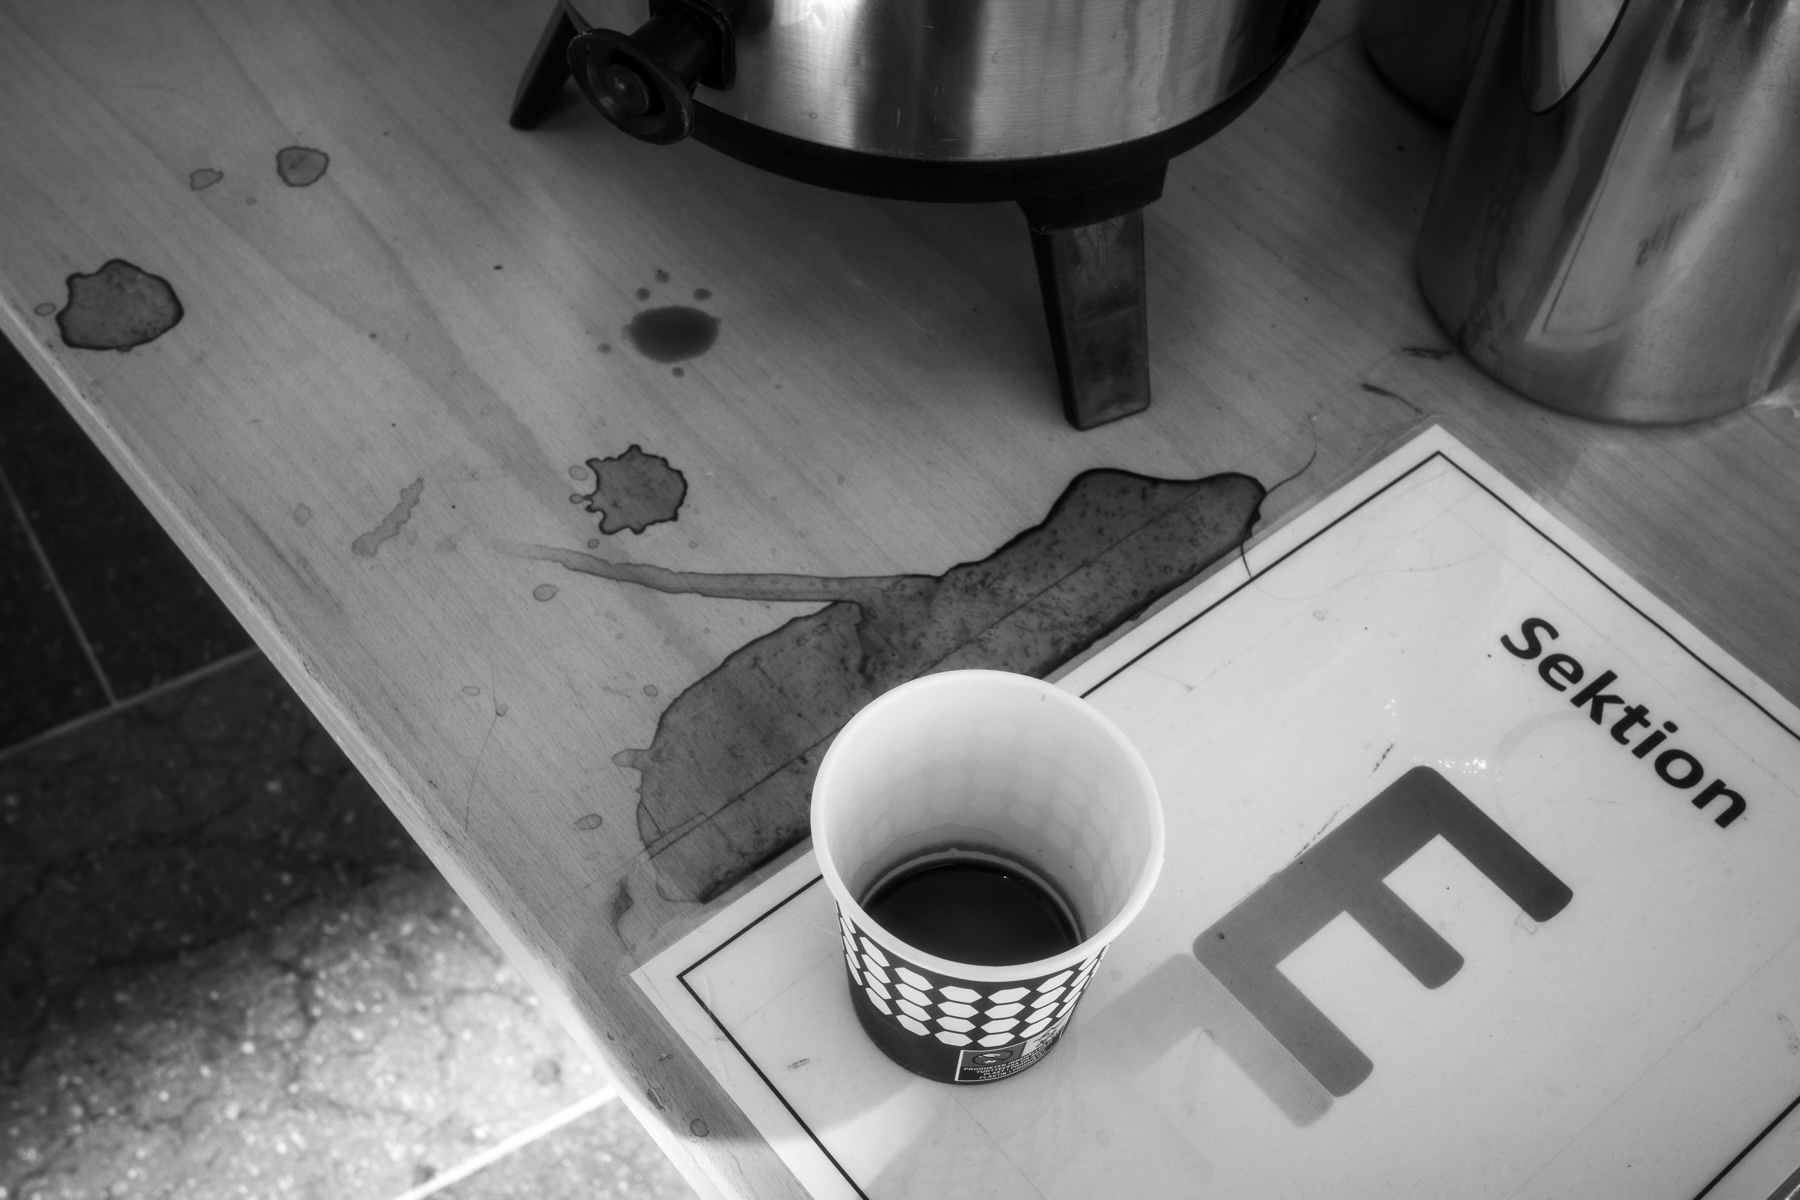 A black-and-white image showing a messy coffee station with a paper cup partially filled with dark liquid, likely coffee, placed on a table. There are various coffee stains and spills on the table. The corner of a sign labeled “Sektion E”